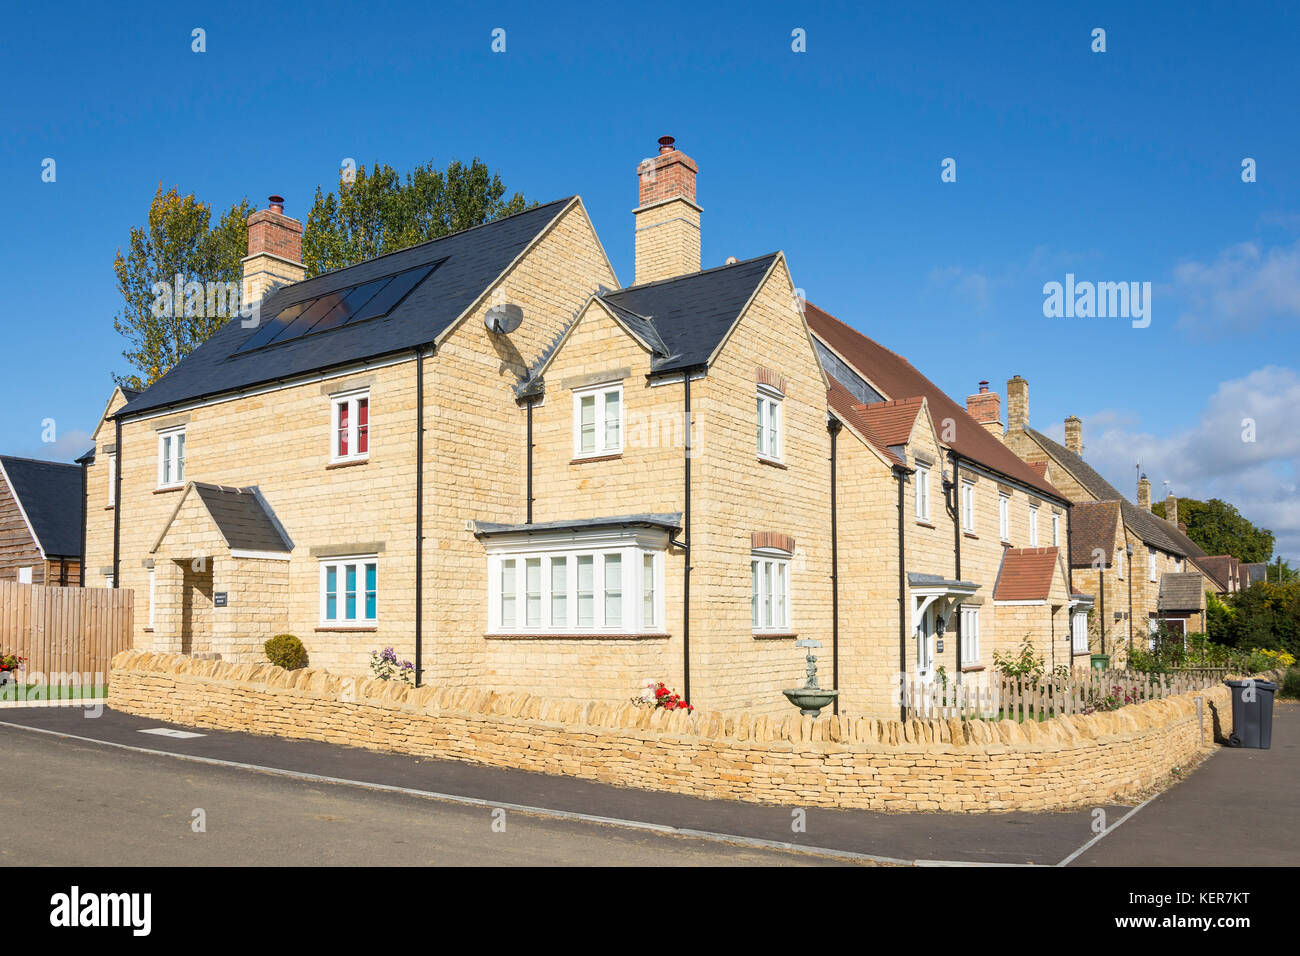 Orchard View chalets, Main Street, Long Compton, Warwickshire, Angleterre, Royaume-Uni Banque D'Images